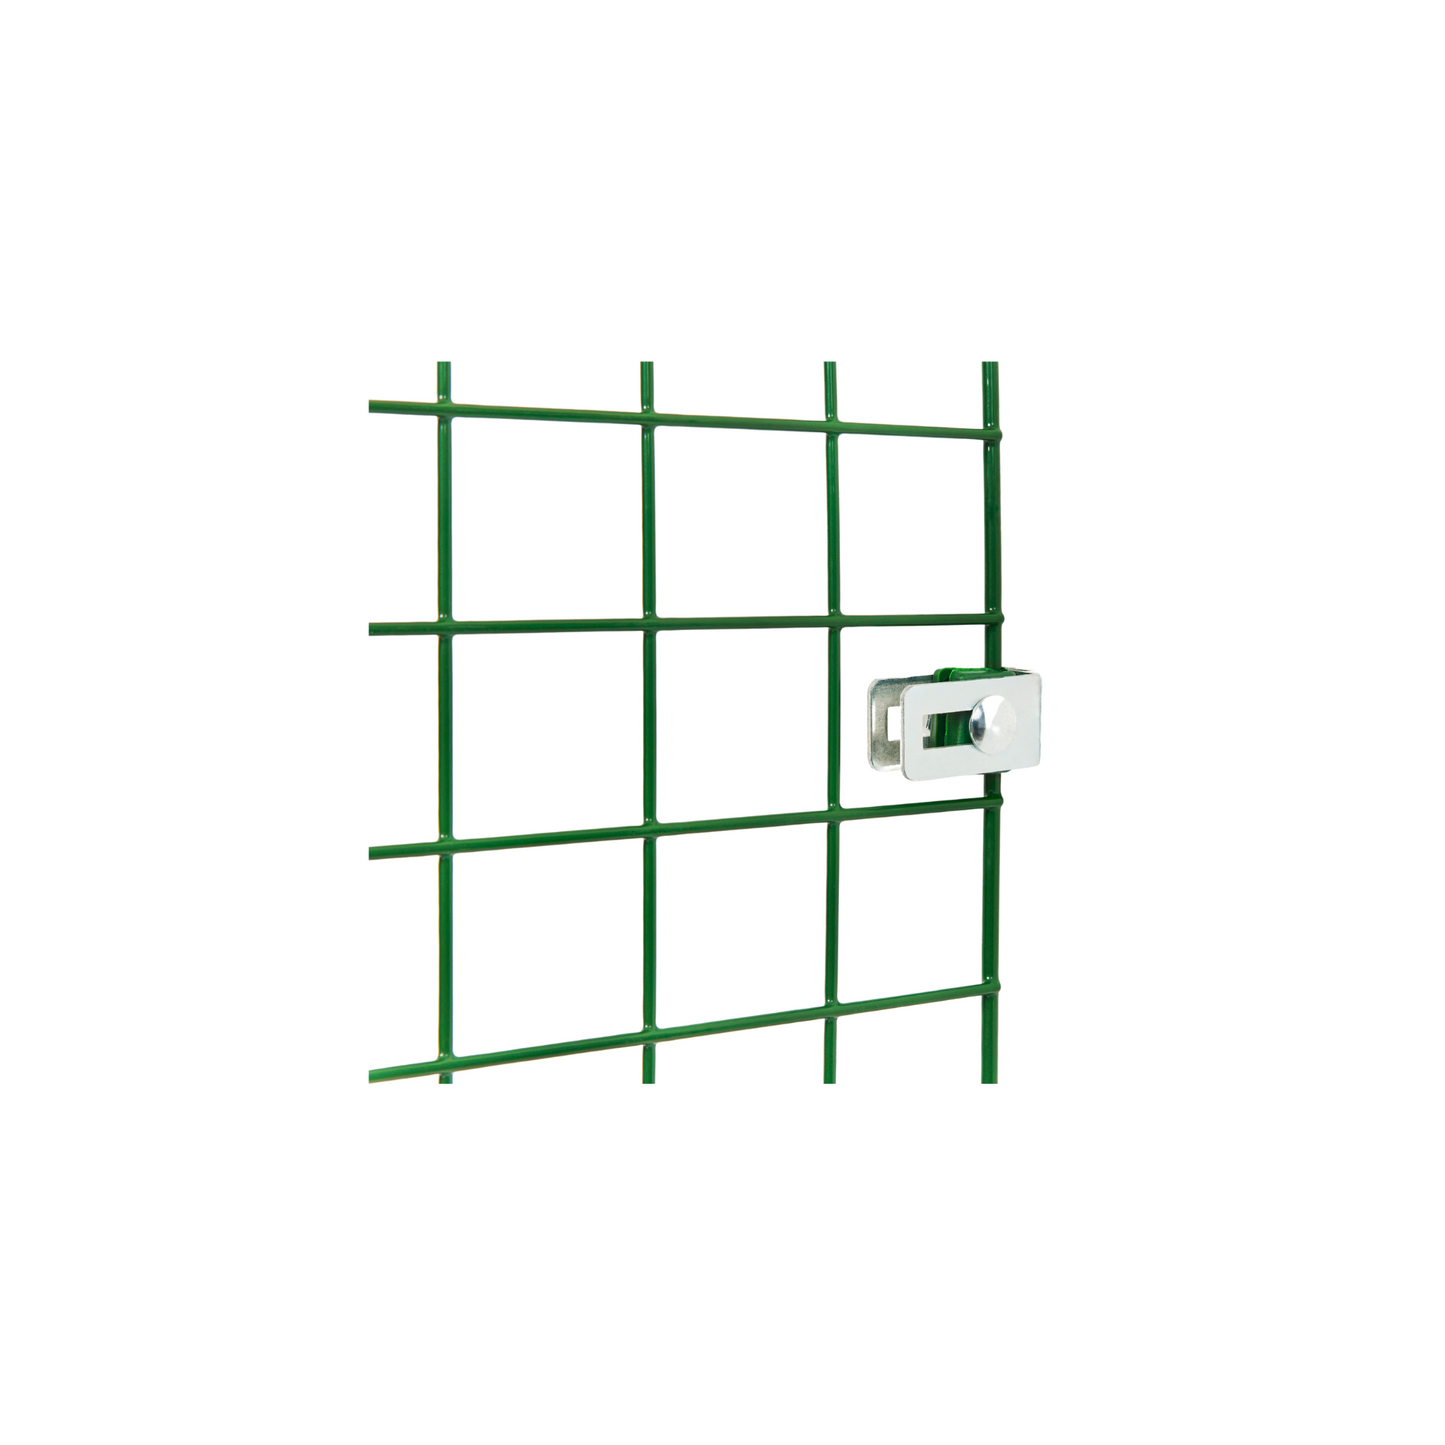 Folding Dog Fence - 1.2m High (50mm x 50mm Mesh) Ideal for Puppy/Small Dogs